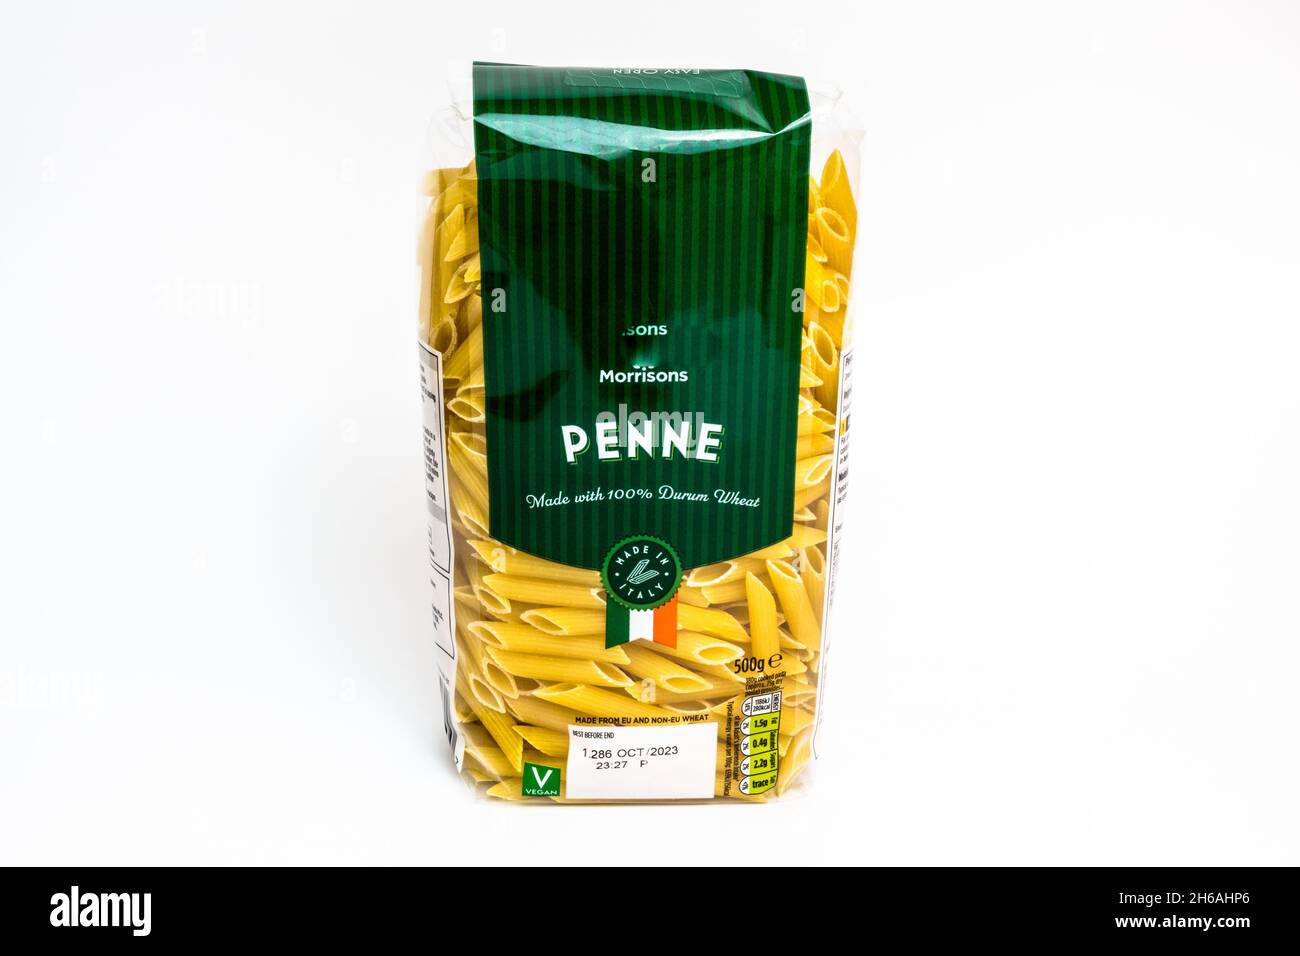 Penne Pasta in a plastic packet by Morrisons supermarket Stock Photo